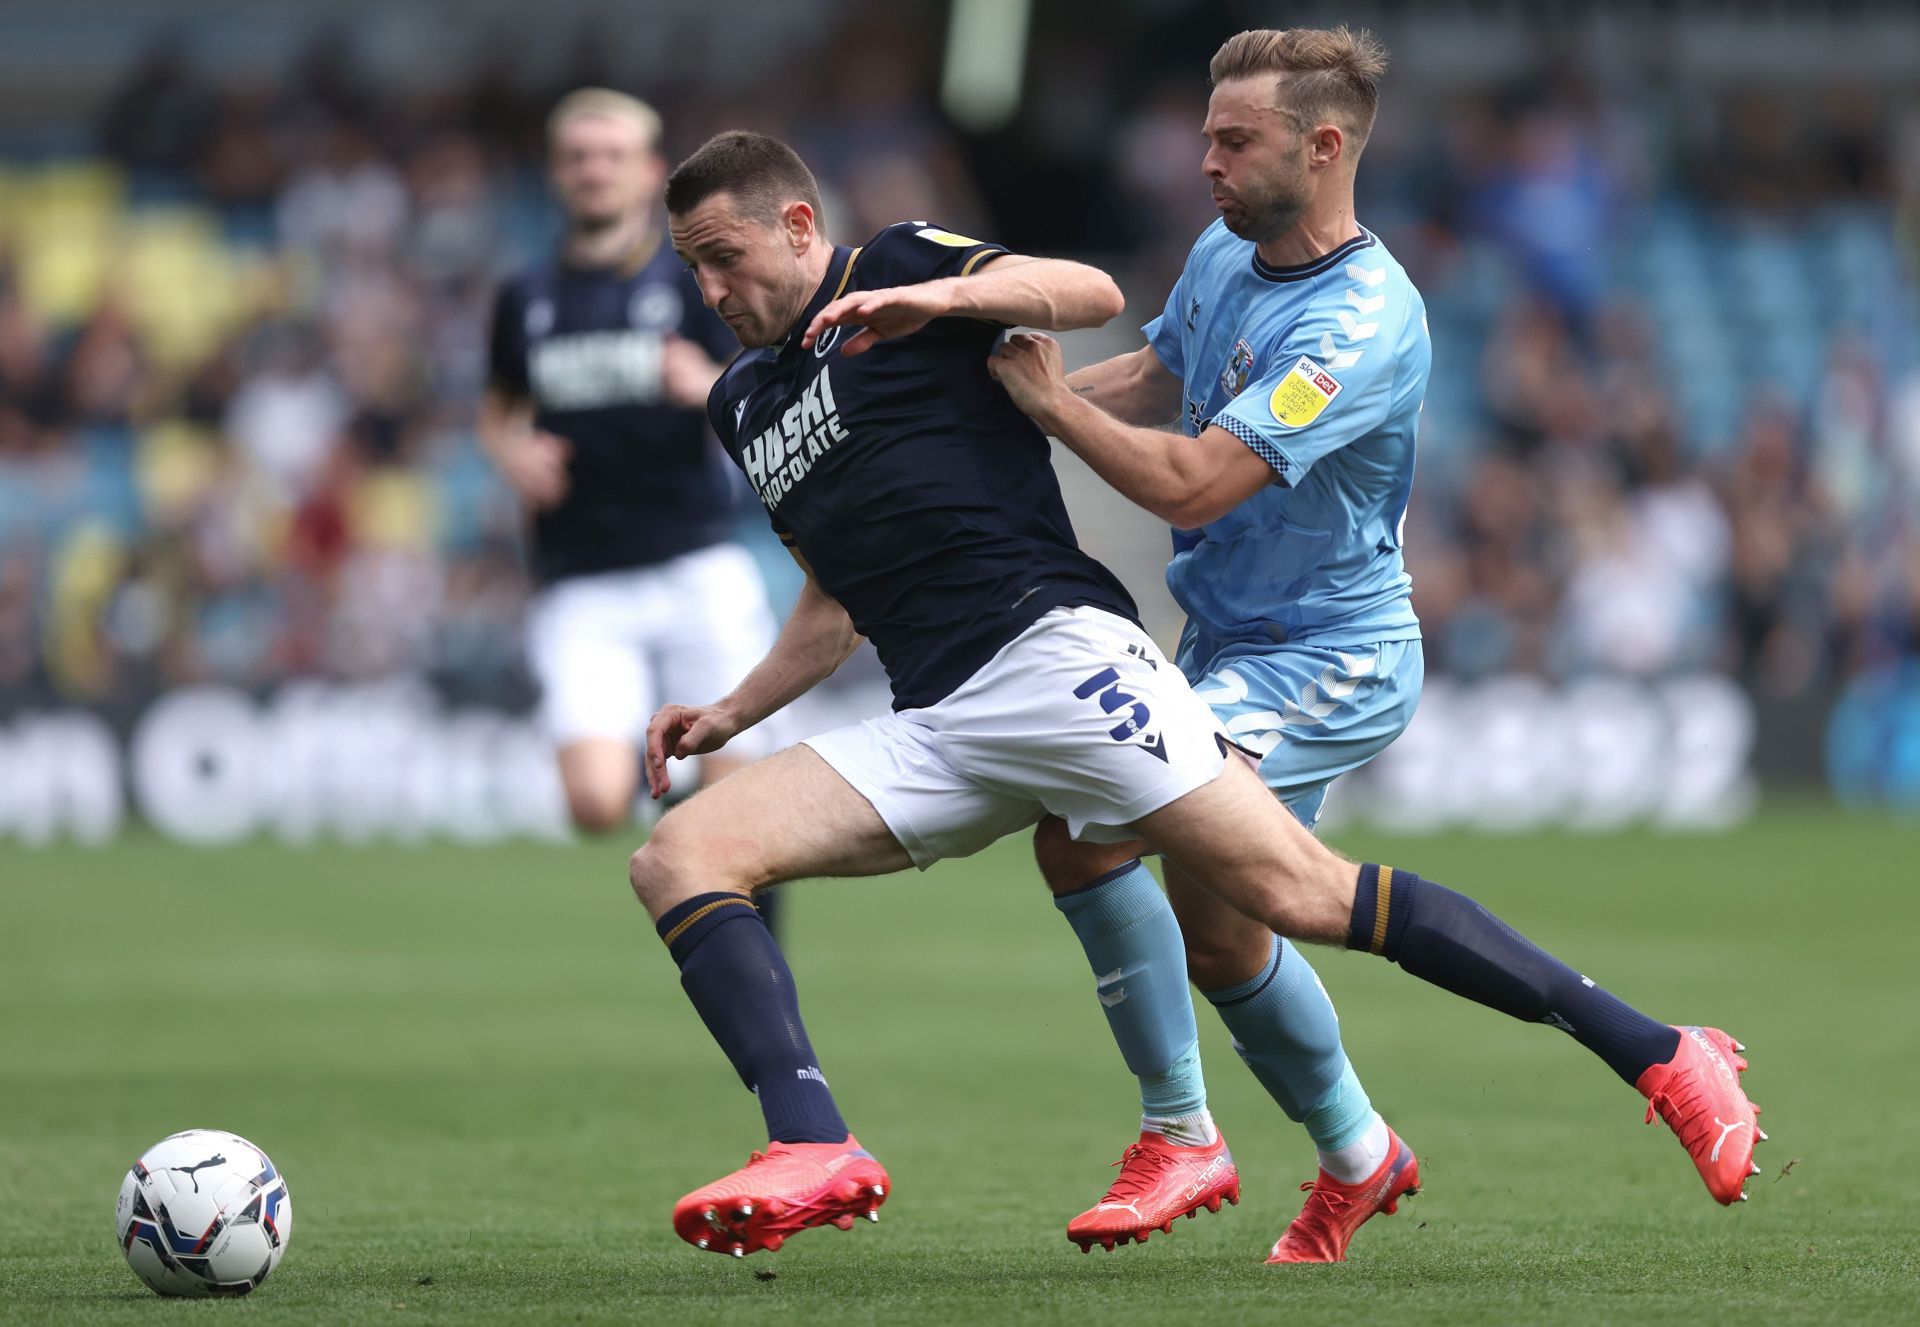 Coventry City and Millwall square off on Wednesday